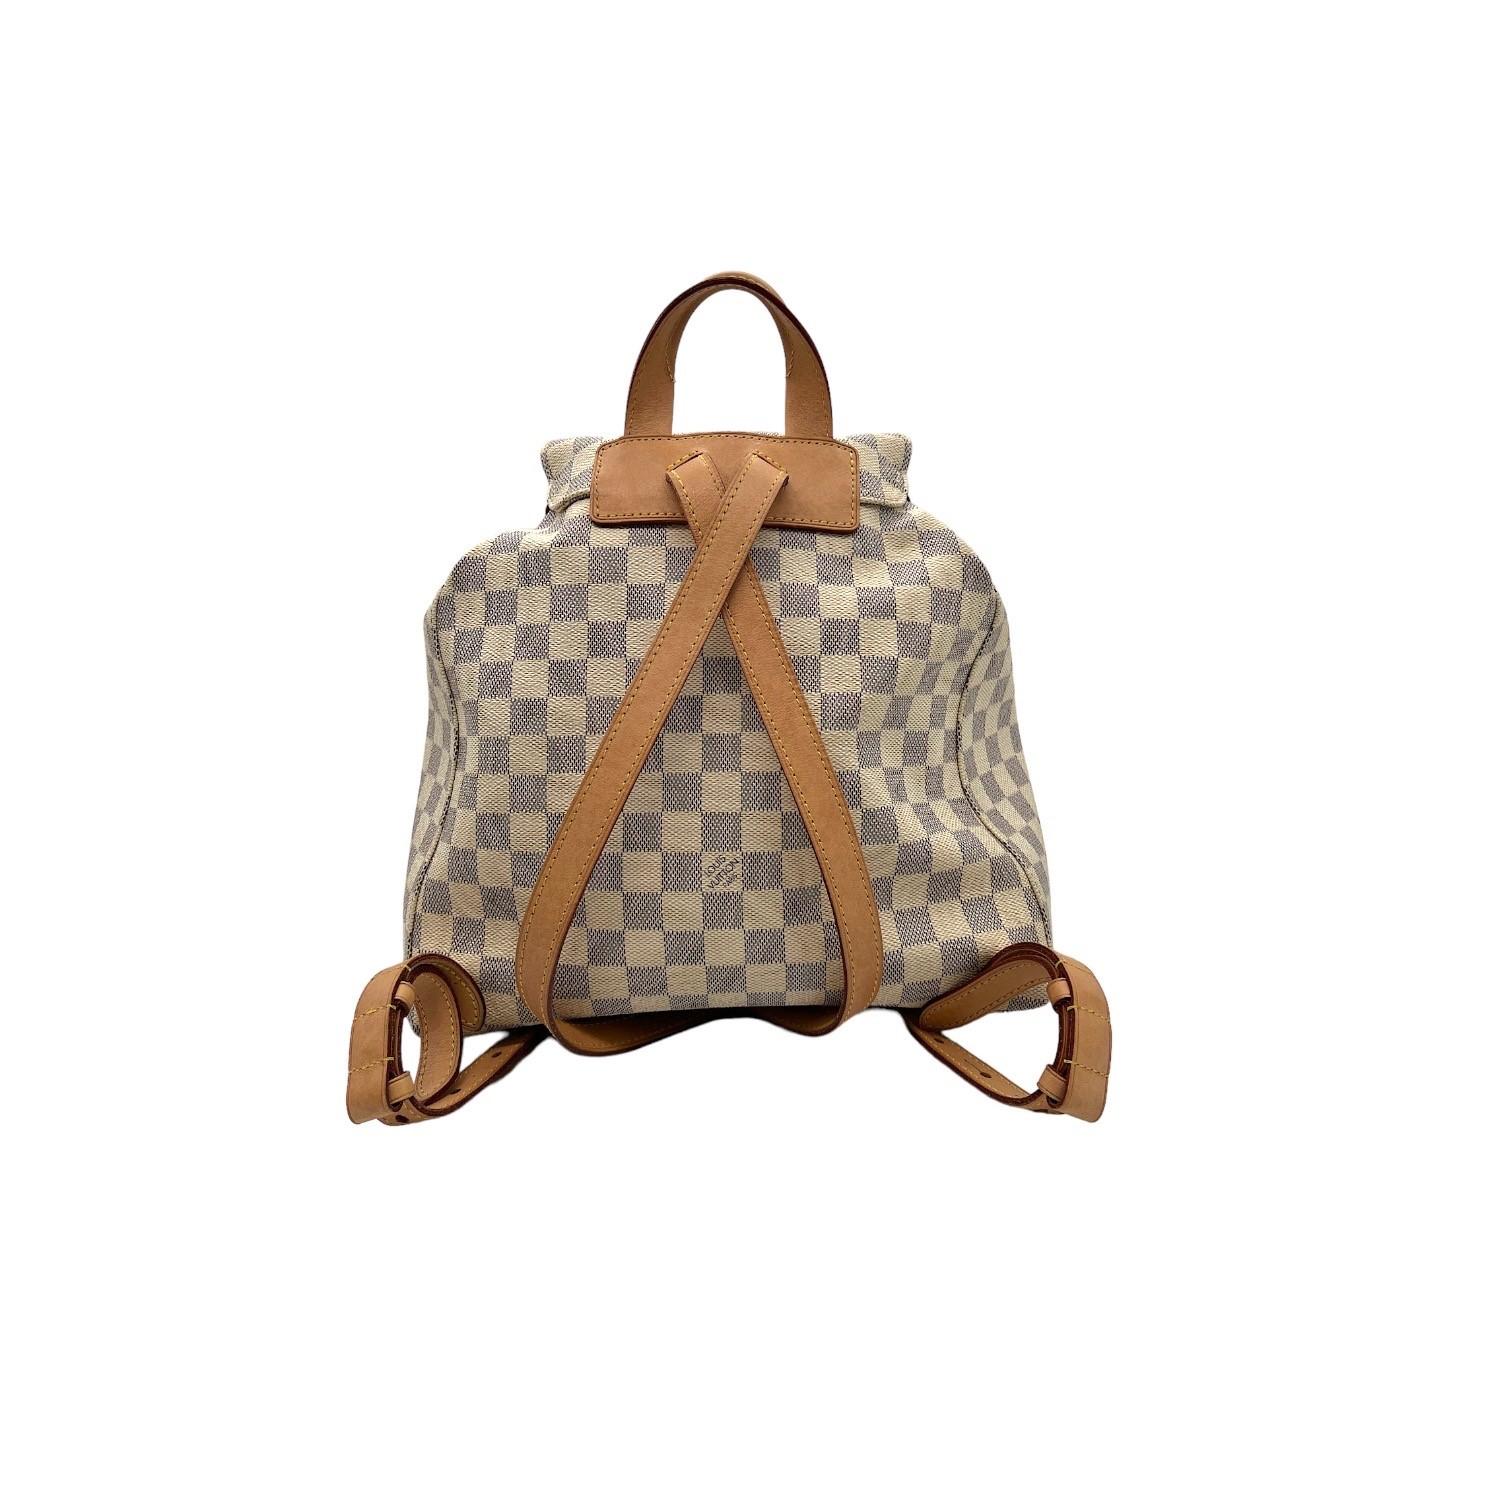 This very beautiful Louis Vuitton backpack is finely crafted of Damier Azur coated canvas with leather trimming and gold-tone hardware features. It has dual adjustable leather shoulder straps along with a small leather handle on the top. It has a